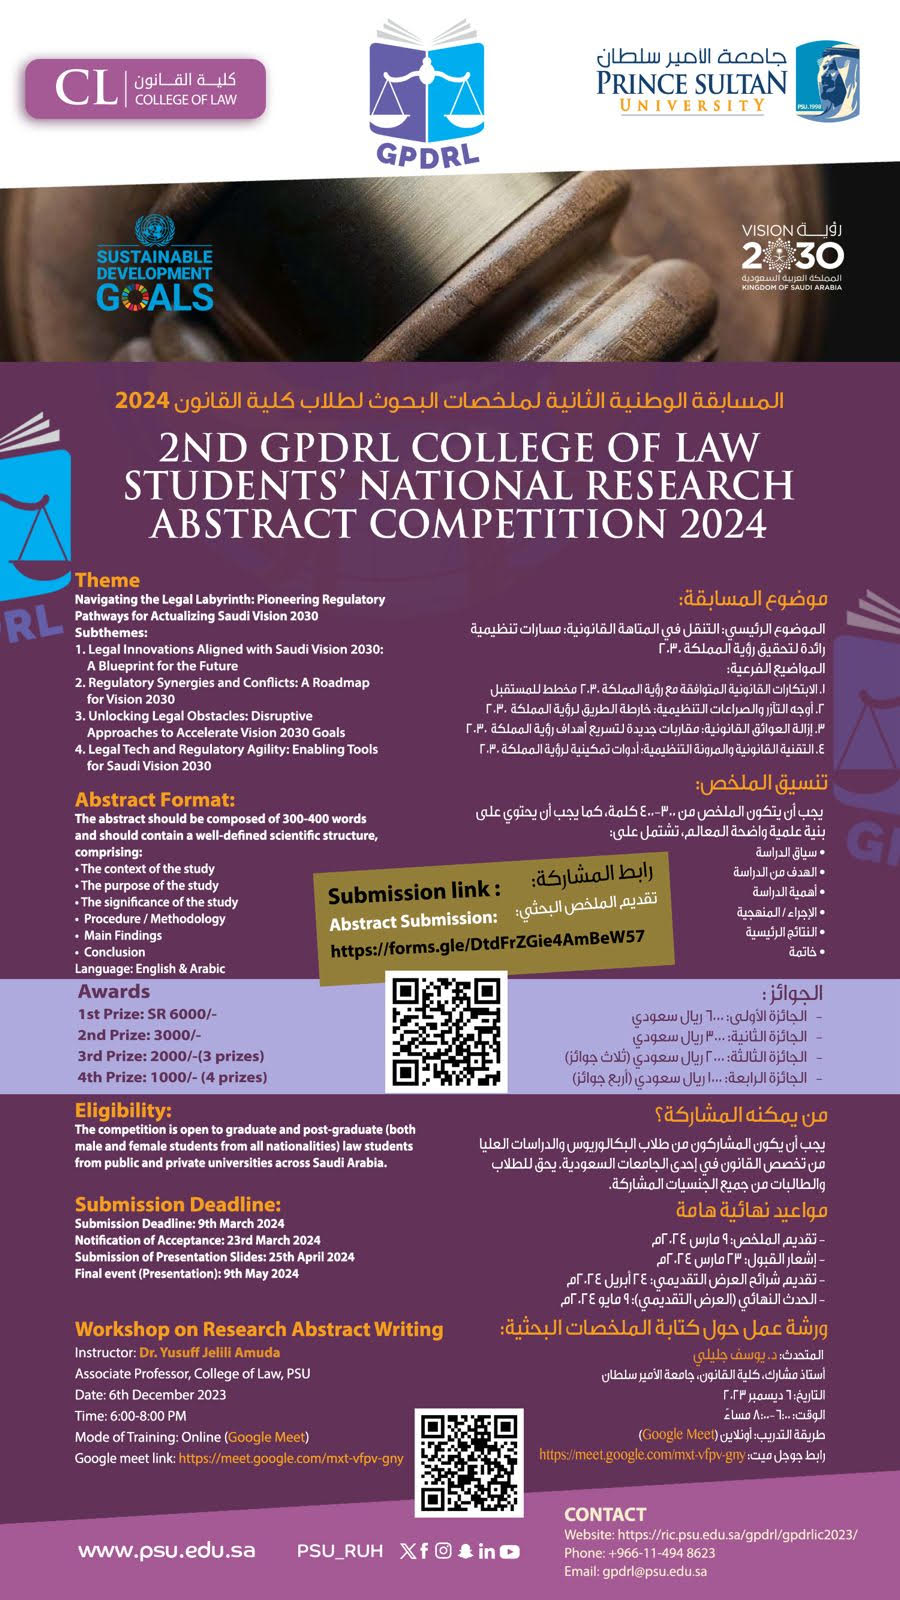 2nd GPDRL College of Law Students National Research Abstract Competition 2024